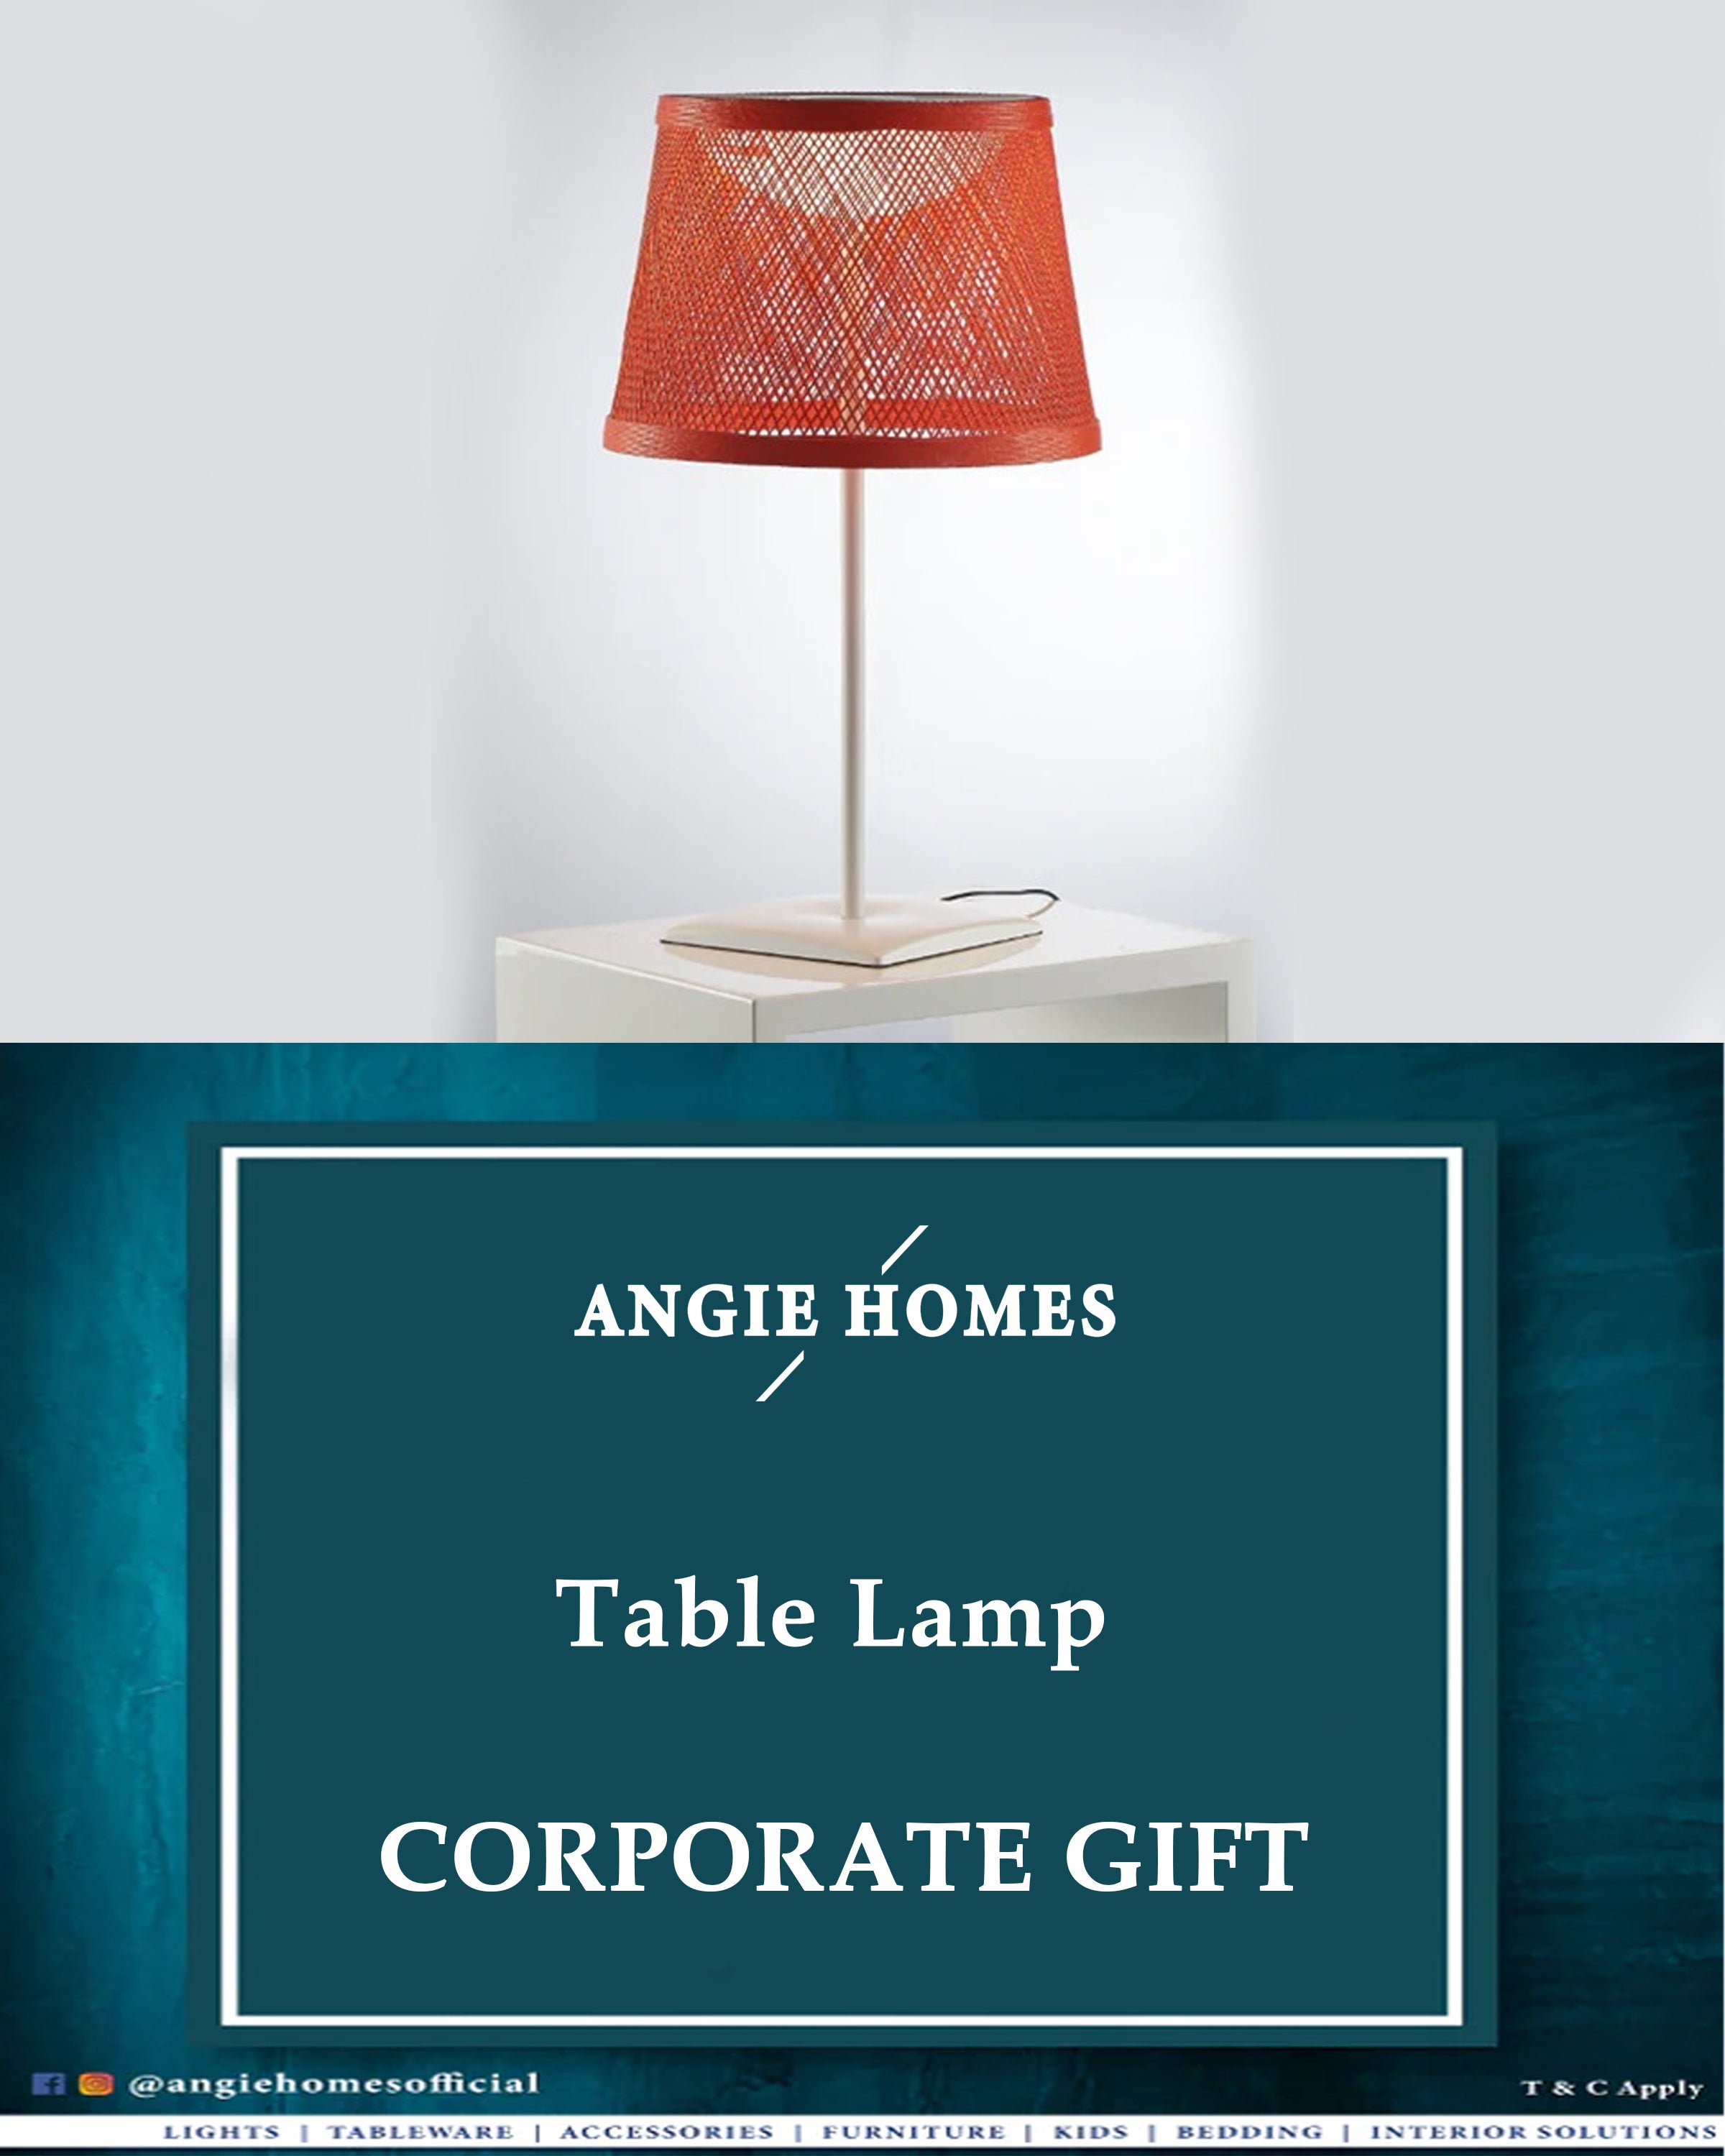 Table Lamp for Wedding, House Warming & Corporate Gift ANGIE HOMES